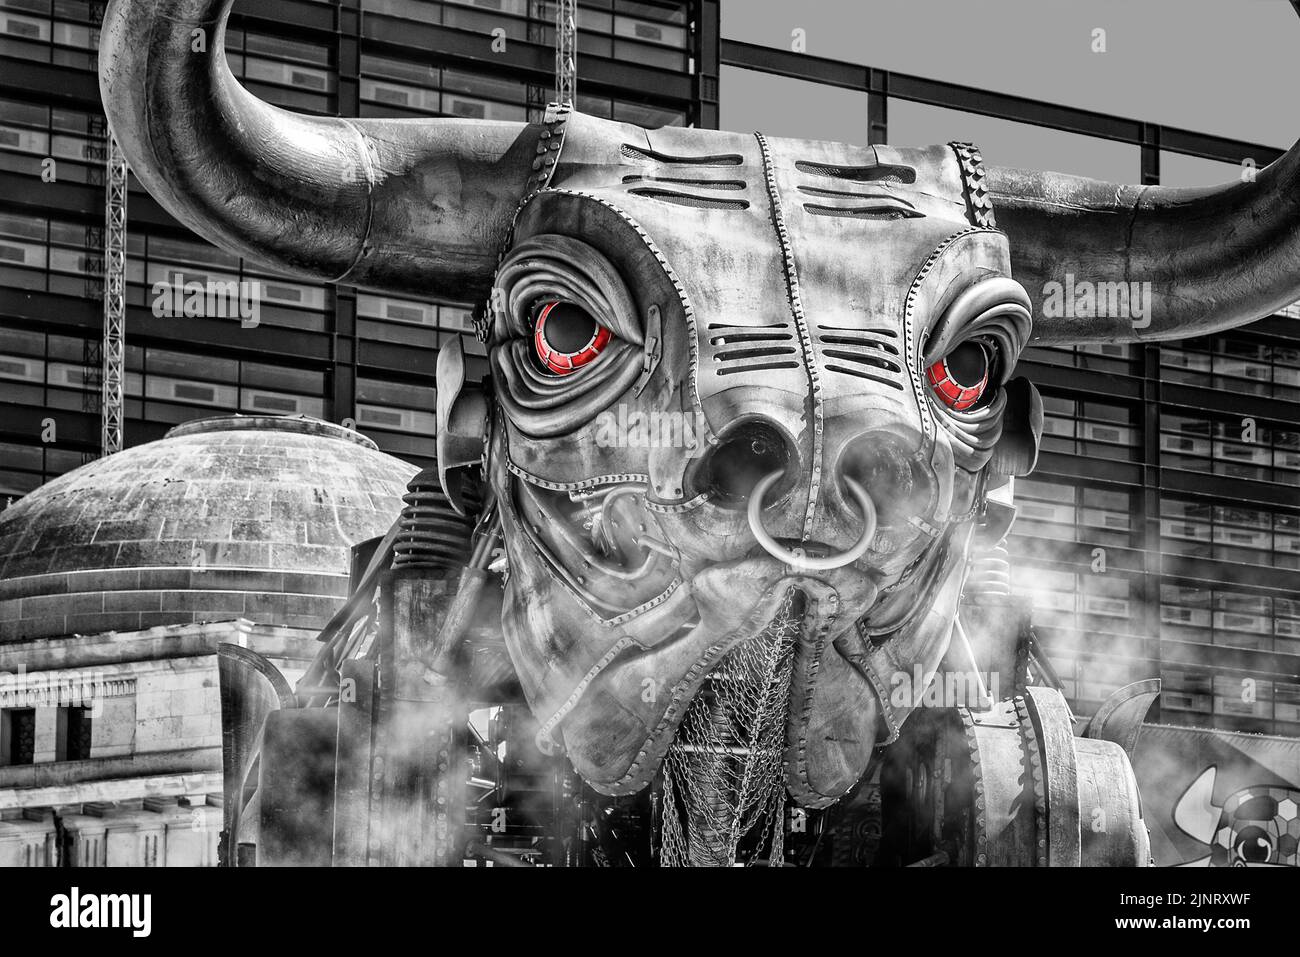 Detail of the 10 metre high raging bull from the 2022 Commonwealth Games opening ceremony, now a very popular tourist attraction in Birmingham. Stock Photo